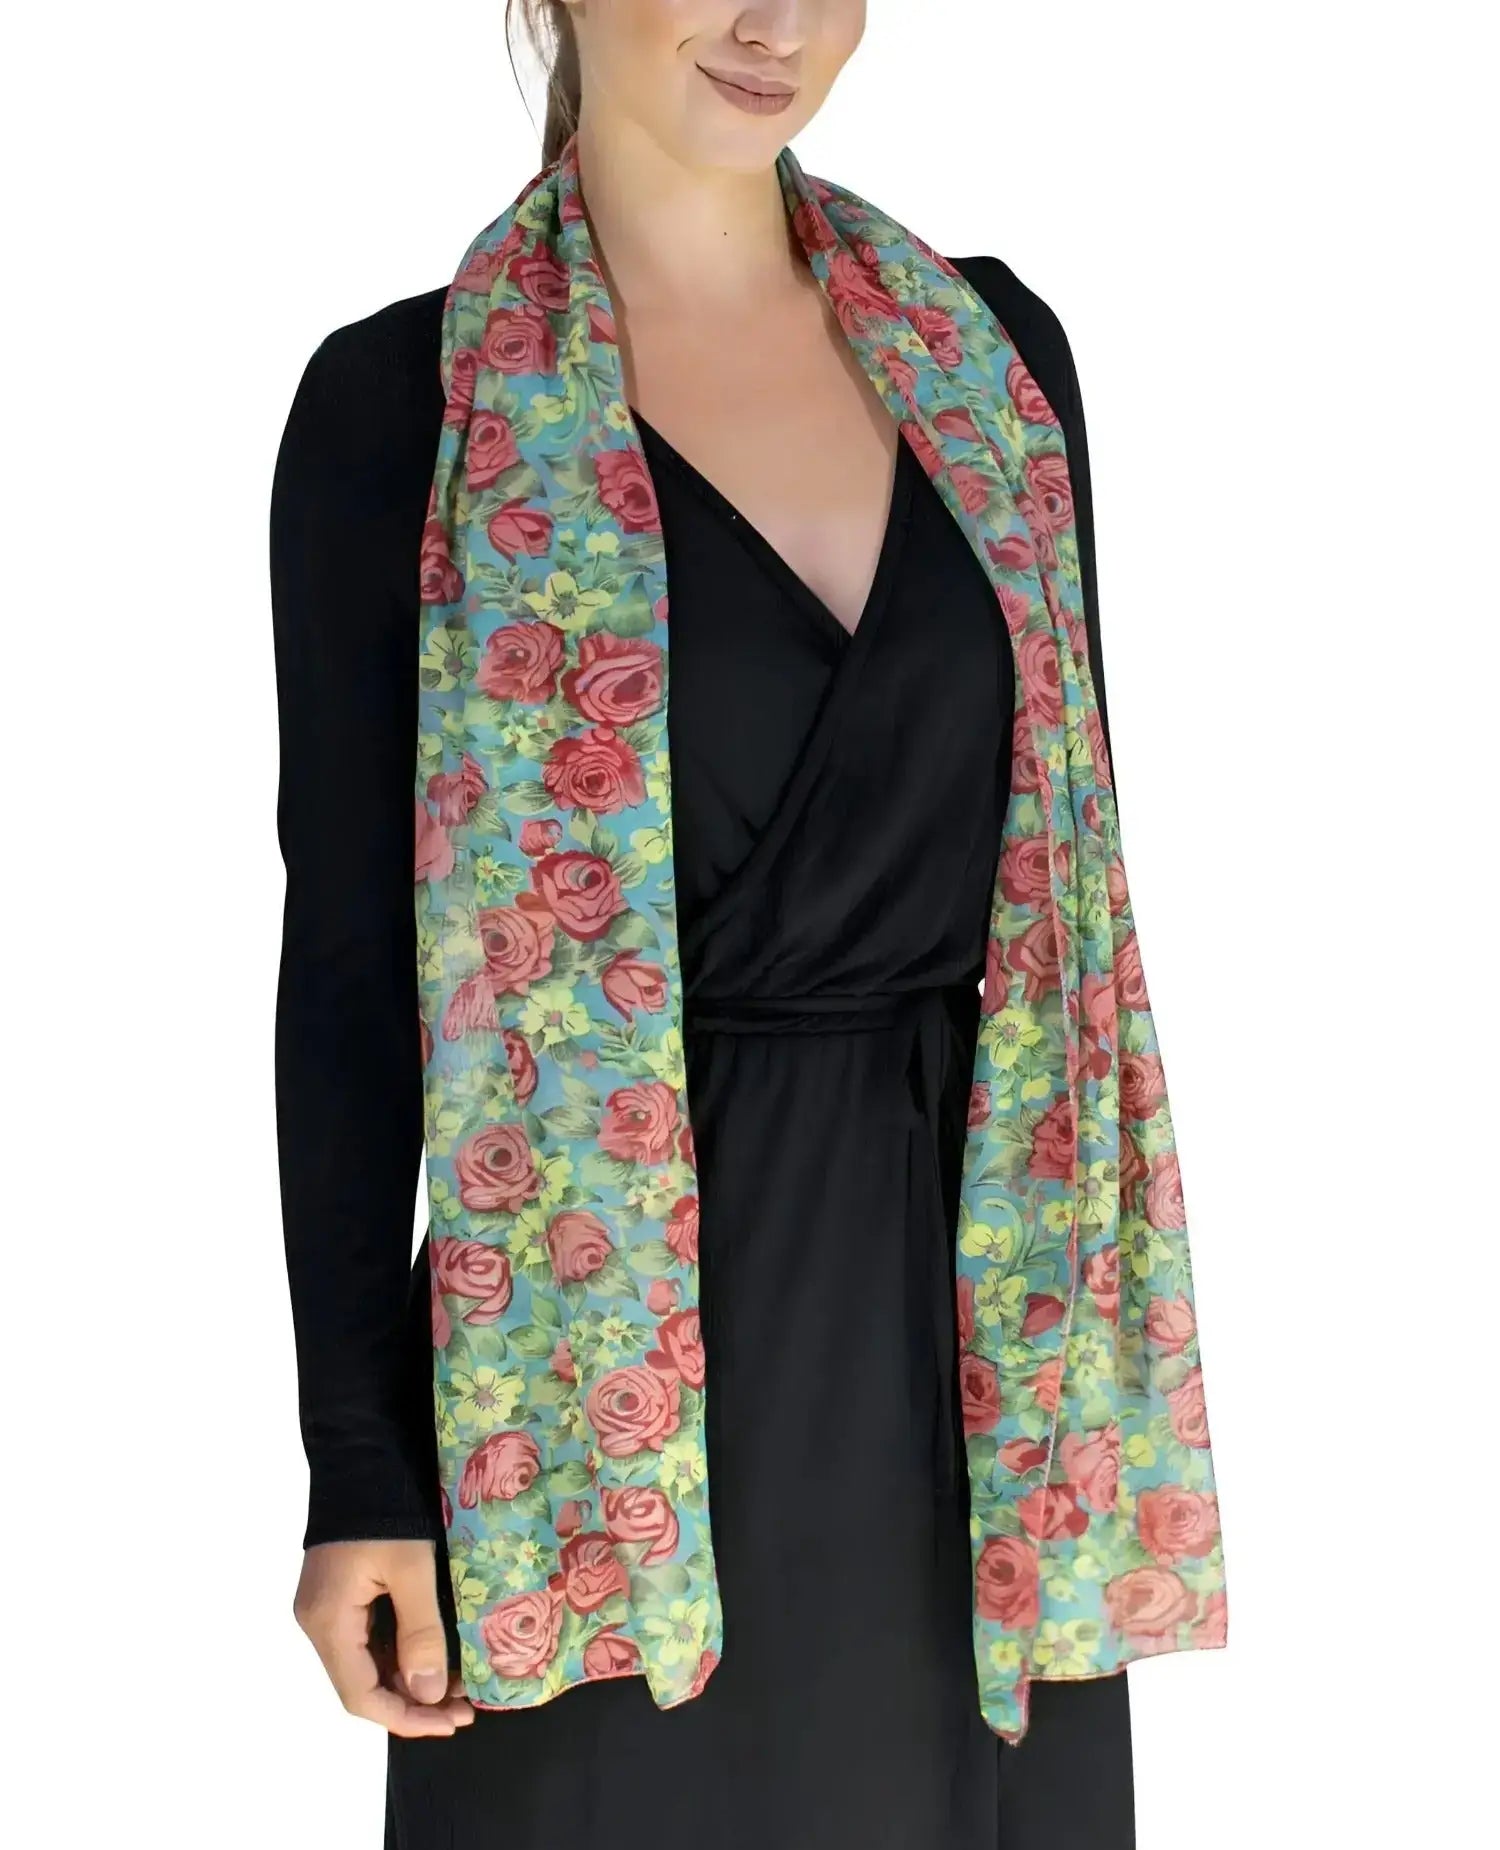 Woman wearing Rose & Ditsy Floral Print Soft Scarf